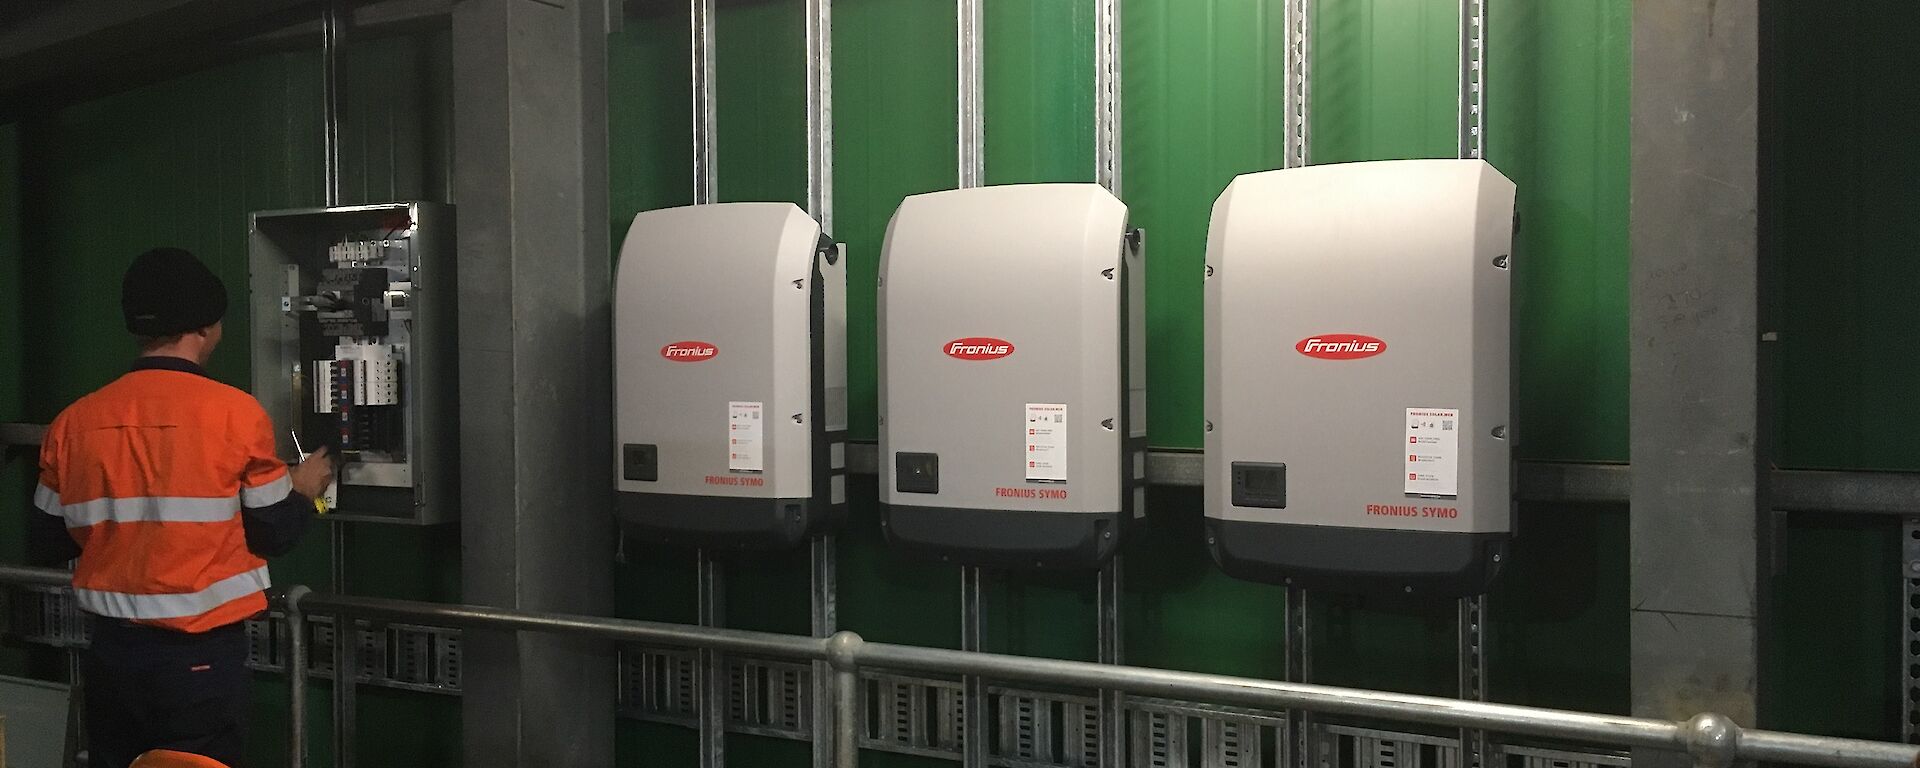 The three inverters that convert DC power into 240V AC power.